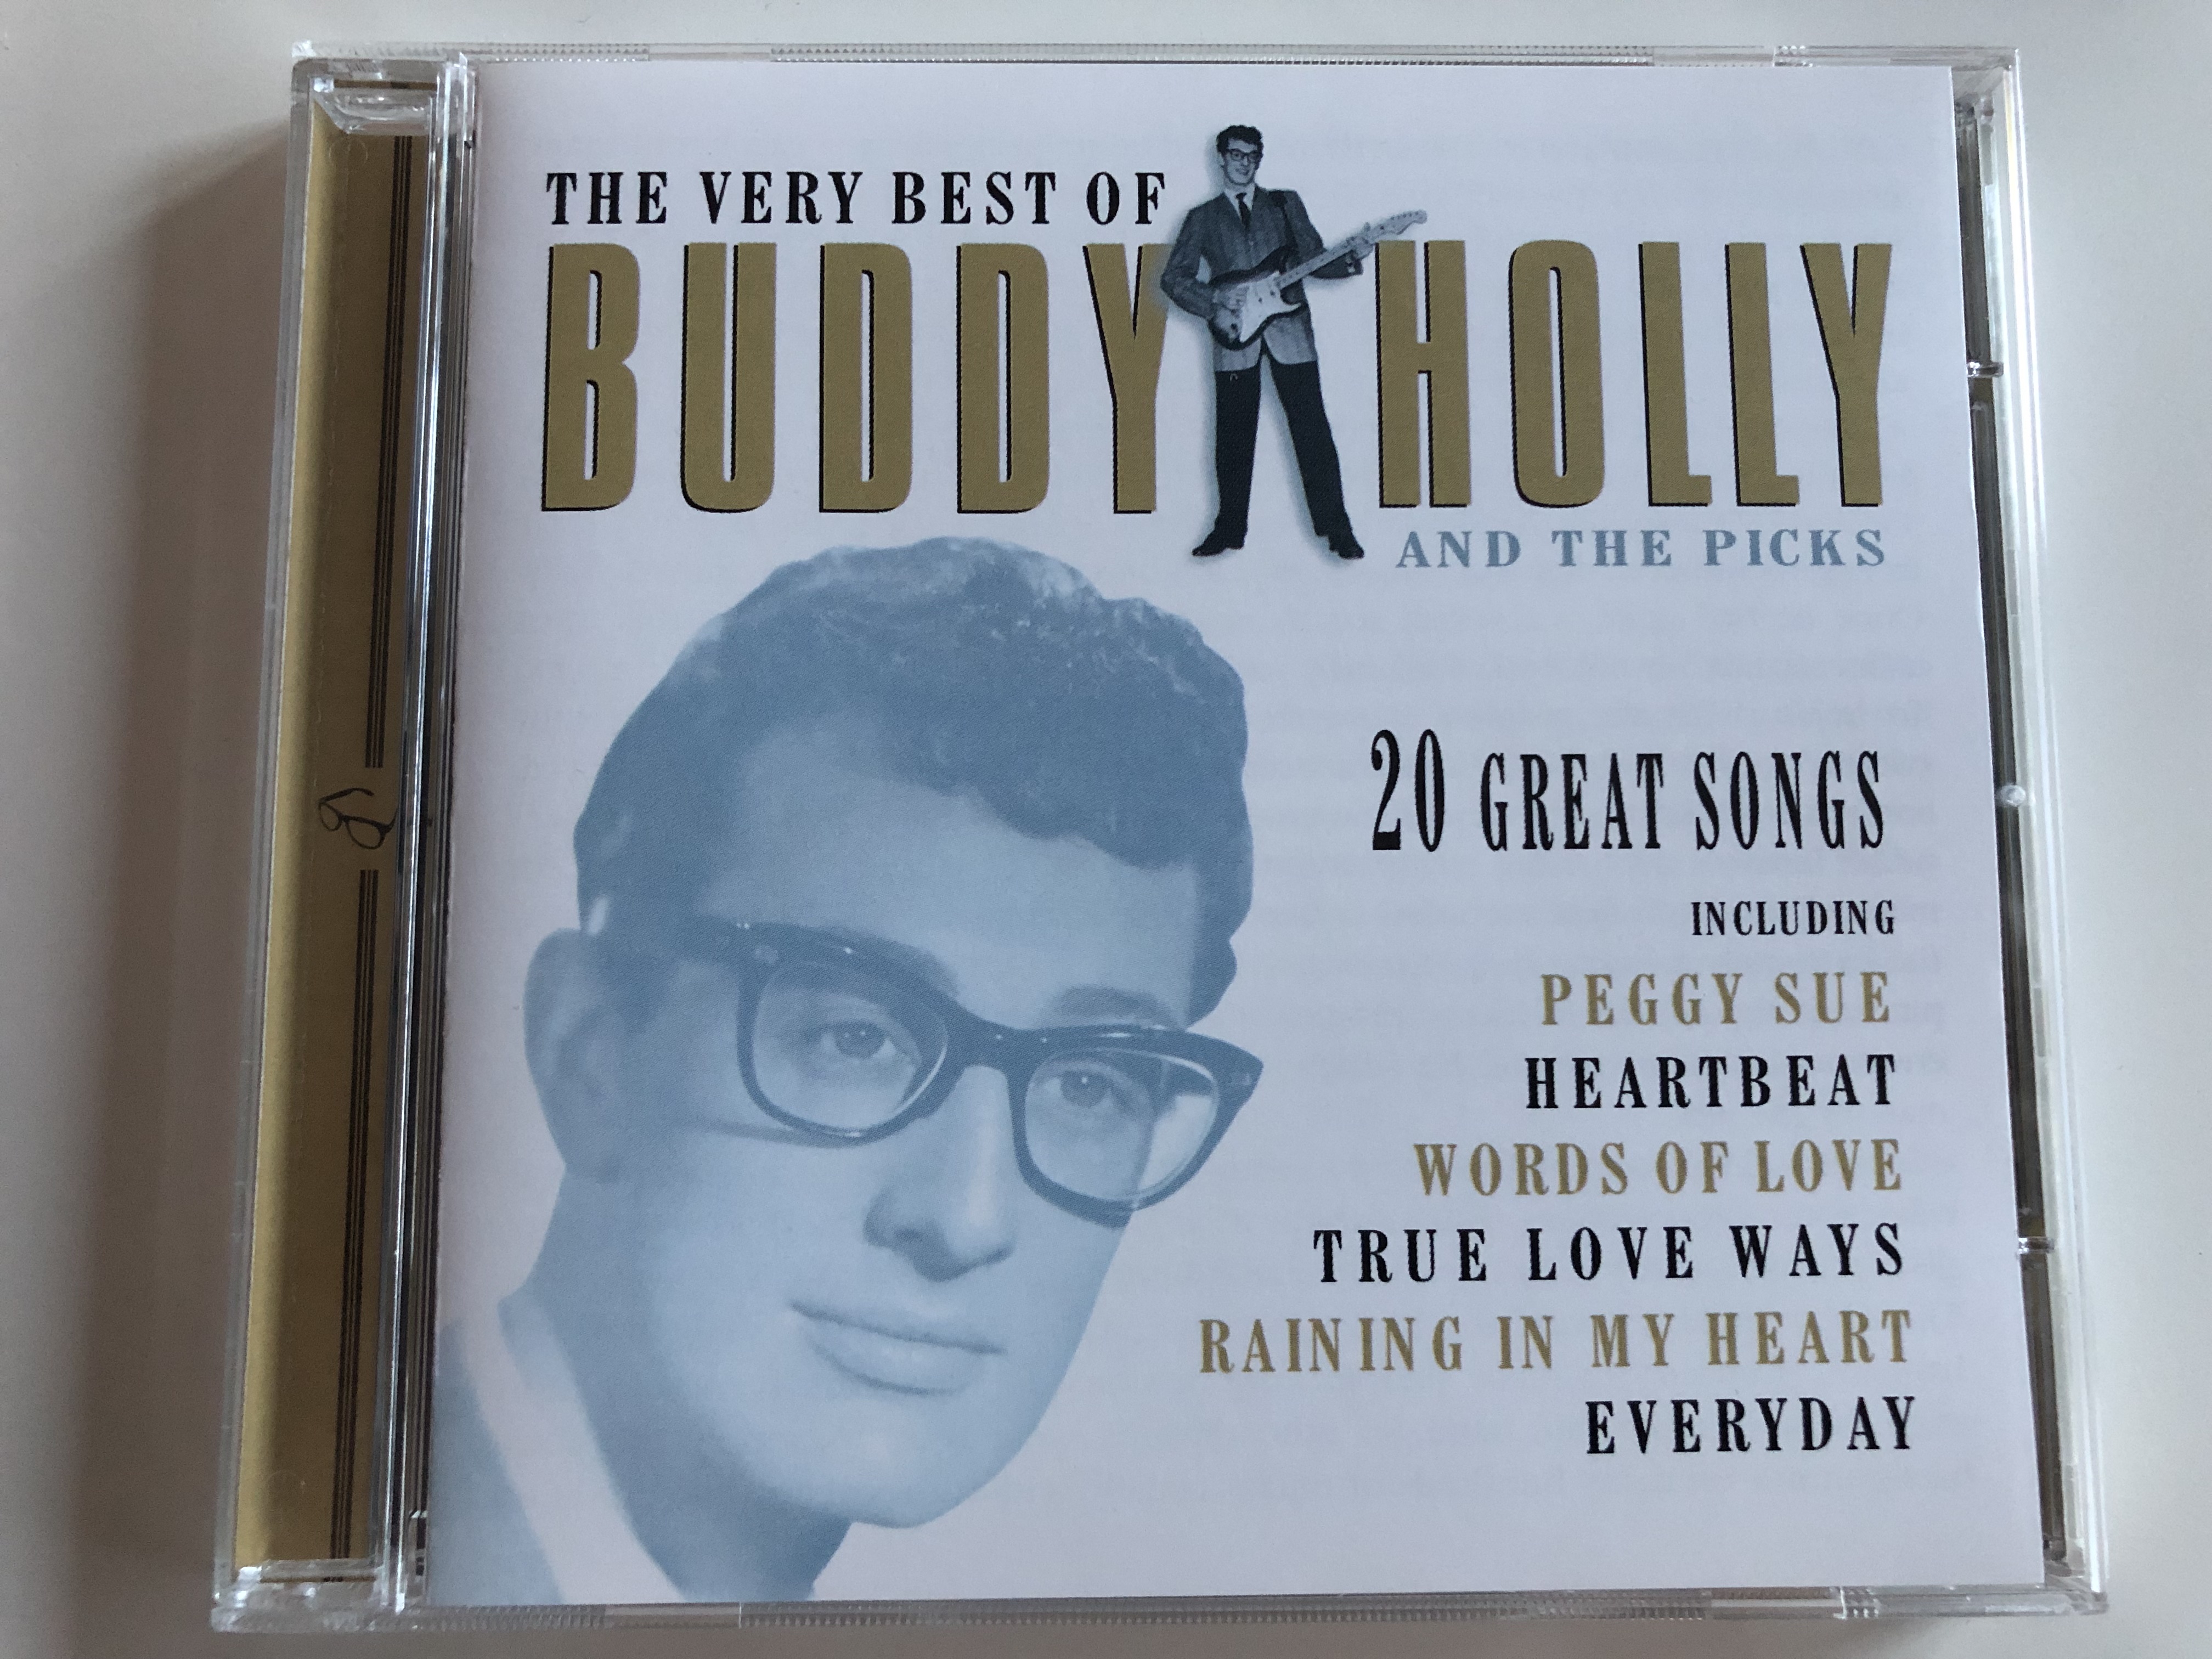 the-very-best-of-buddy-holly-and-the-picks-20-great-songs-including-peggy-sue-heartbeat-words-of-love-true-love-ways-raining-in-my-heart-everyday-audio-cd-1999-prism-leisure-platcd-518-1-.jpg